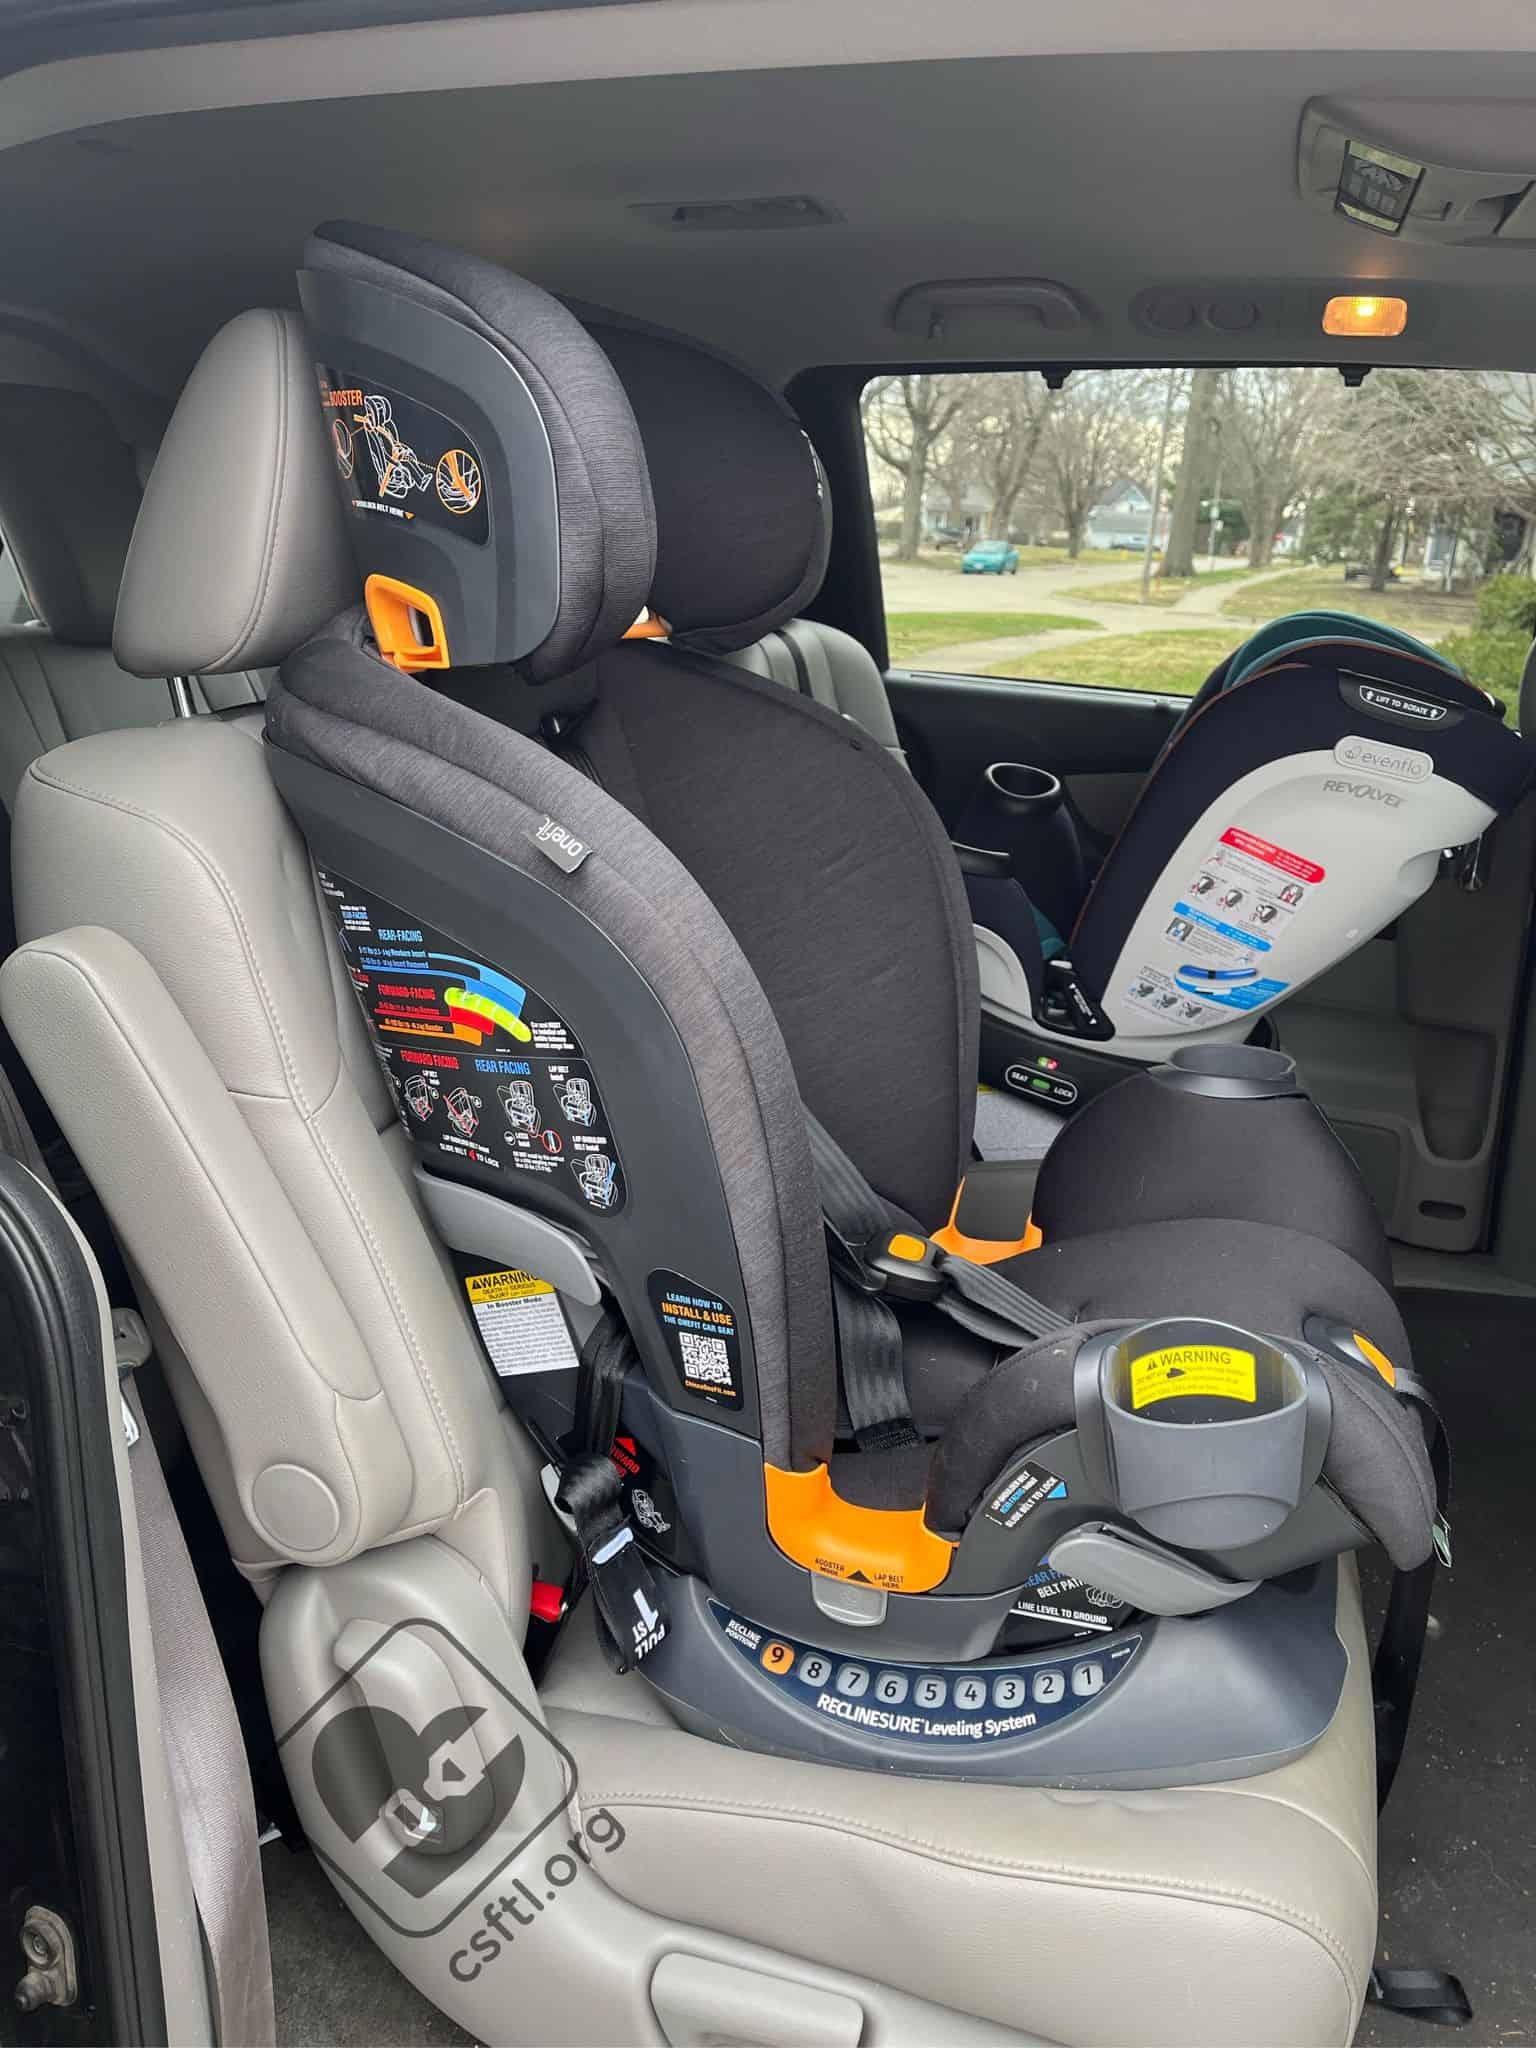 Chicco OneFit Multimode Car Seat Review - Car Seats For The Littles